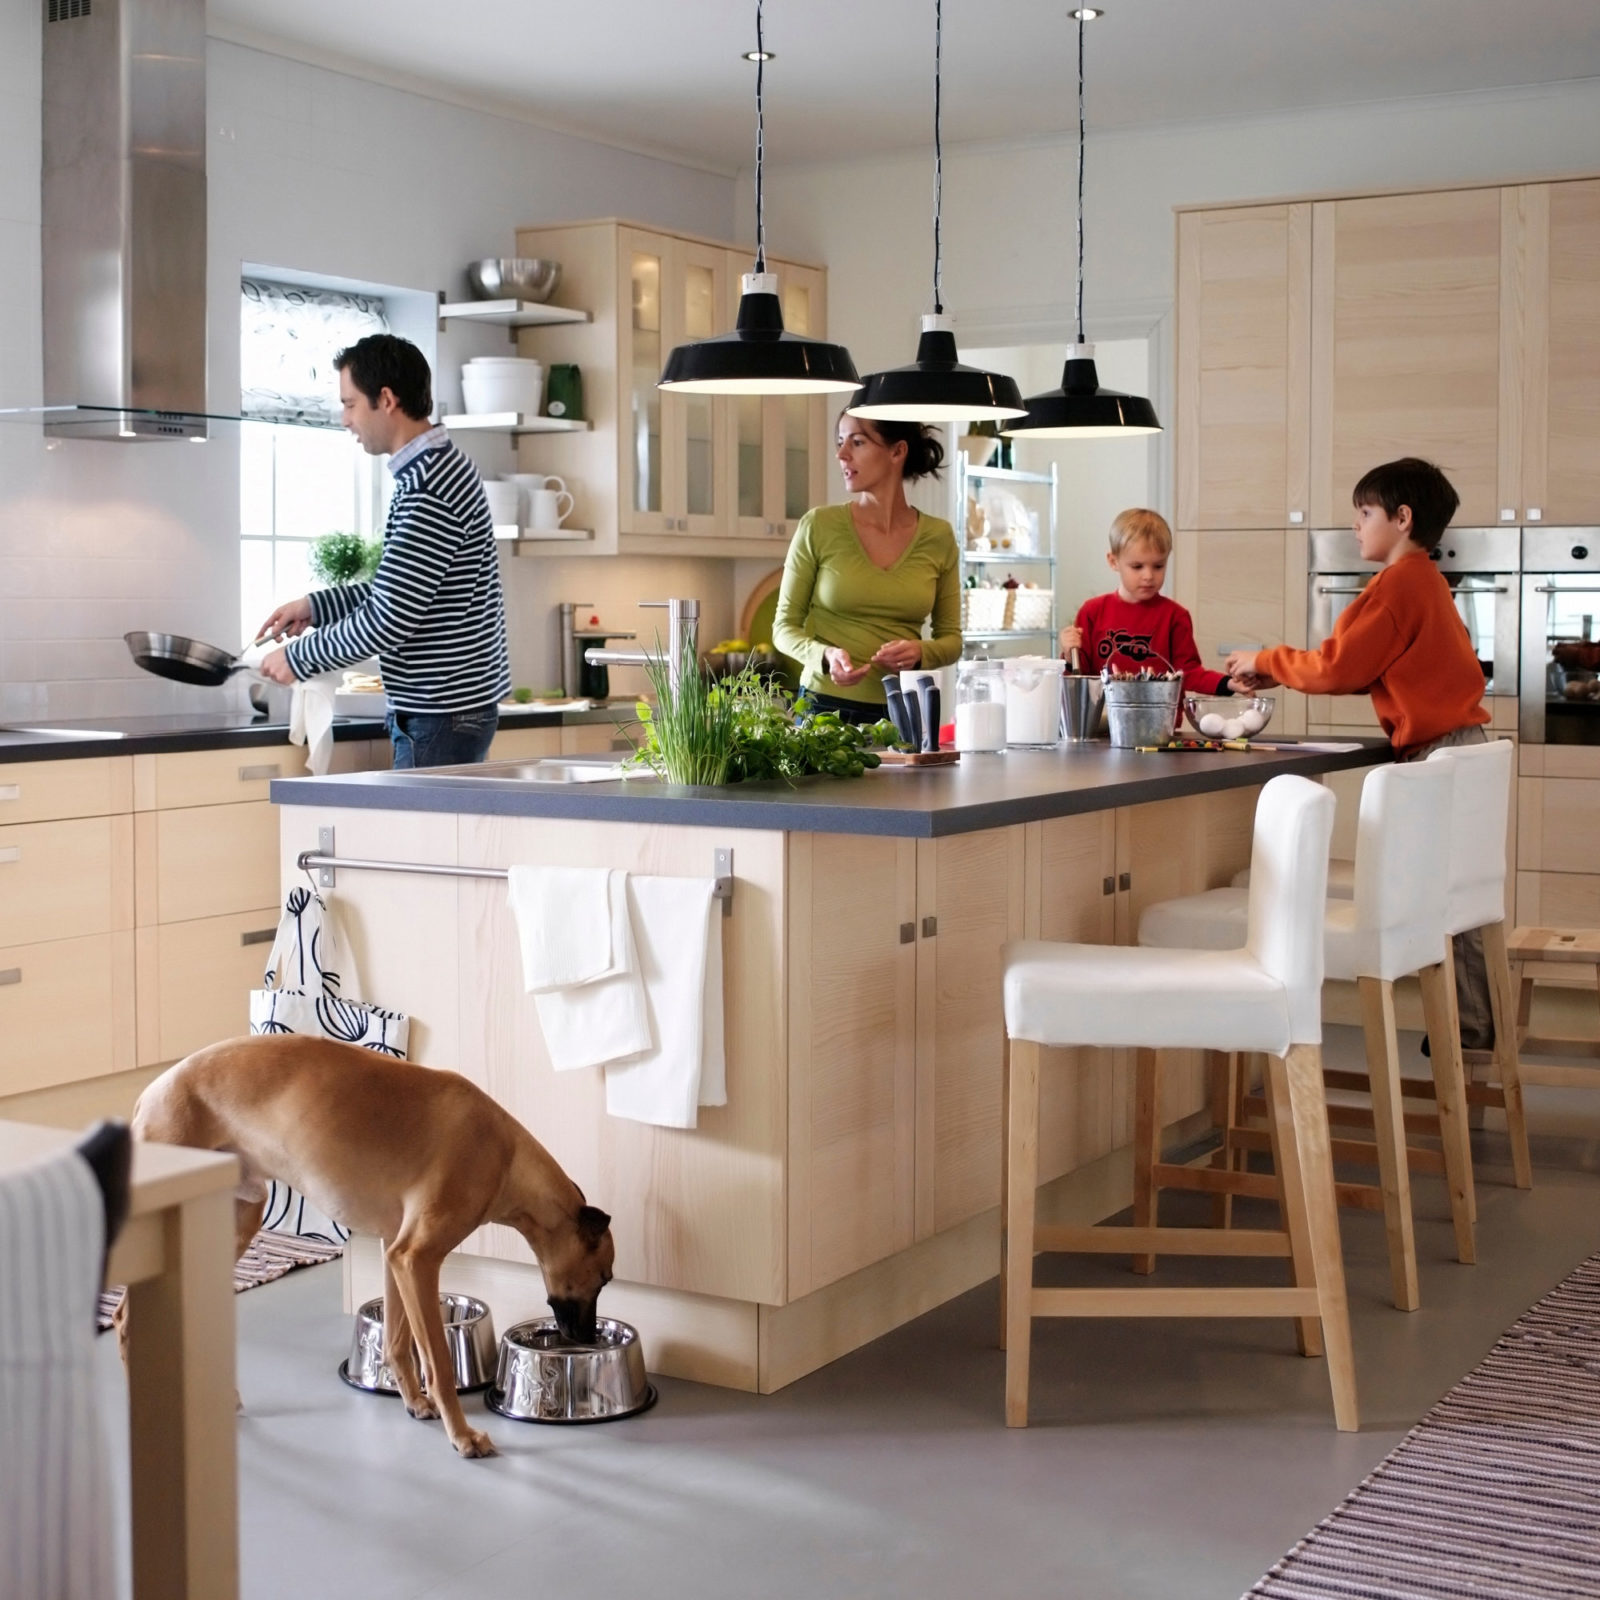 A man, a woman, two children and a dog spread around a large kitchen island with bar stools along one side. The kitchen is in light wood.